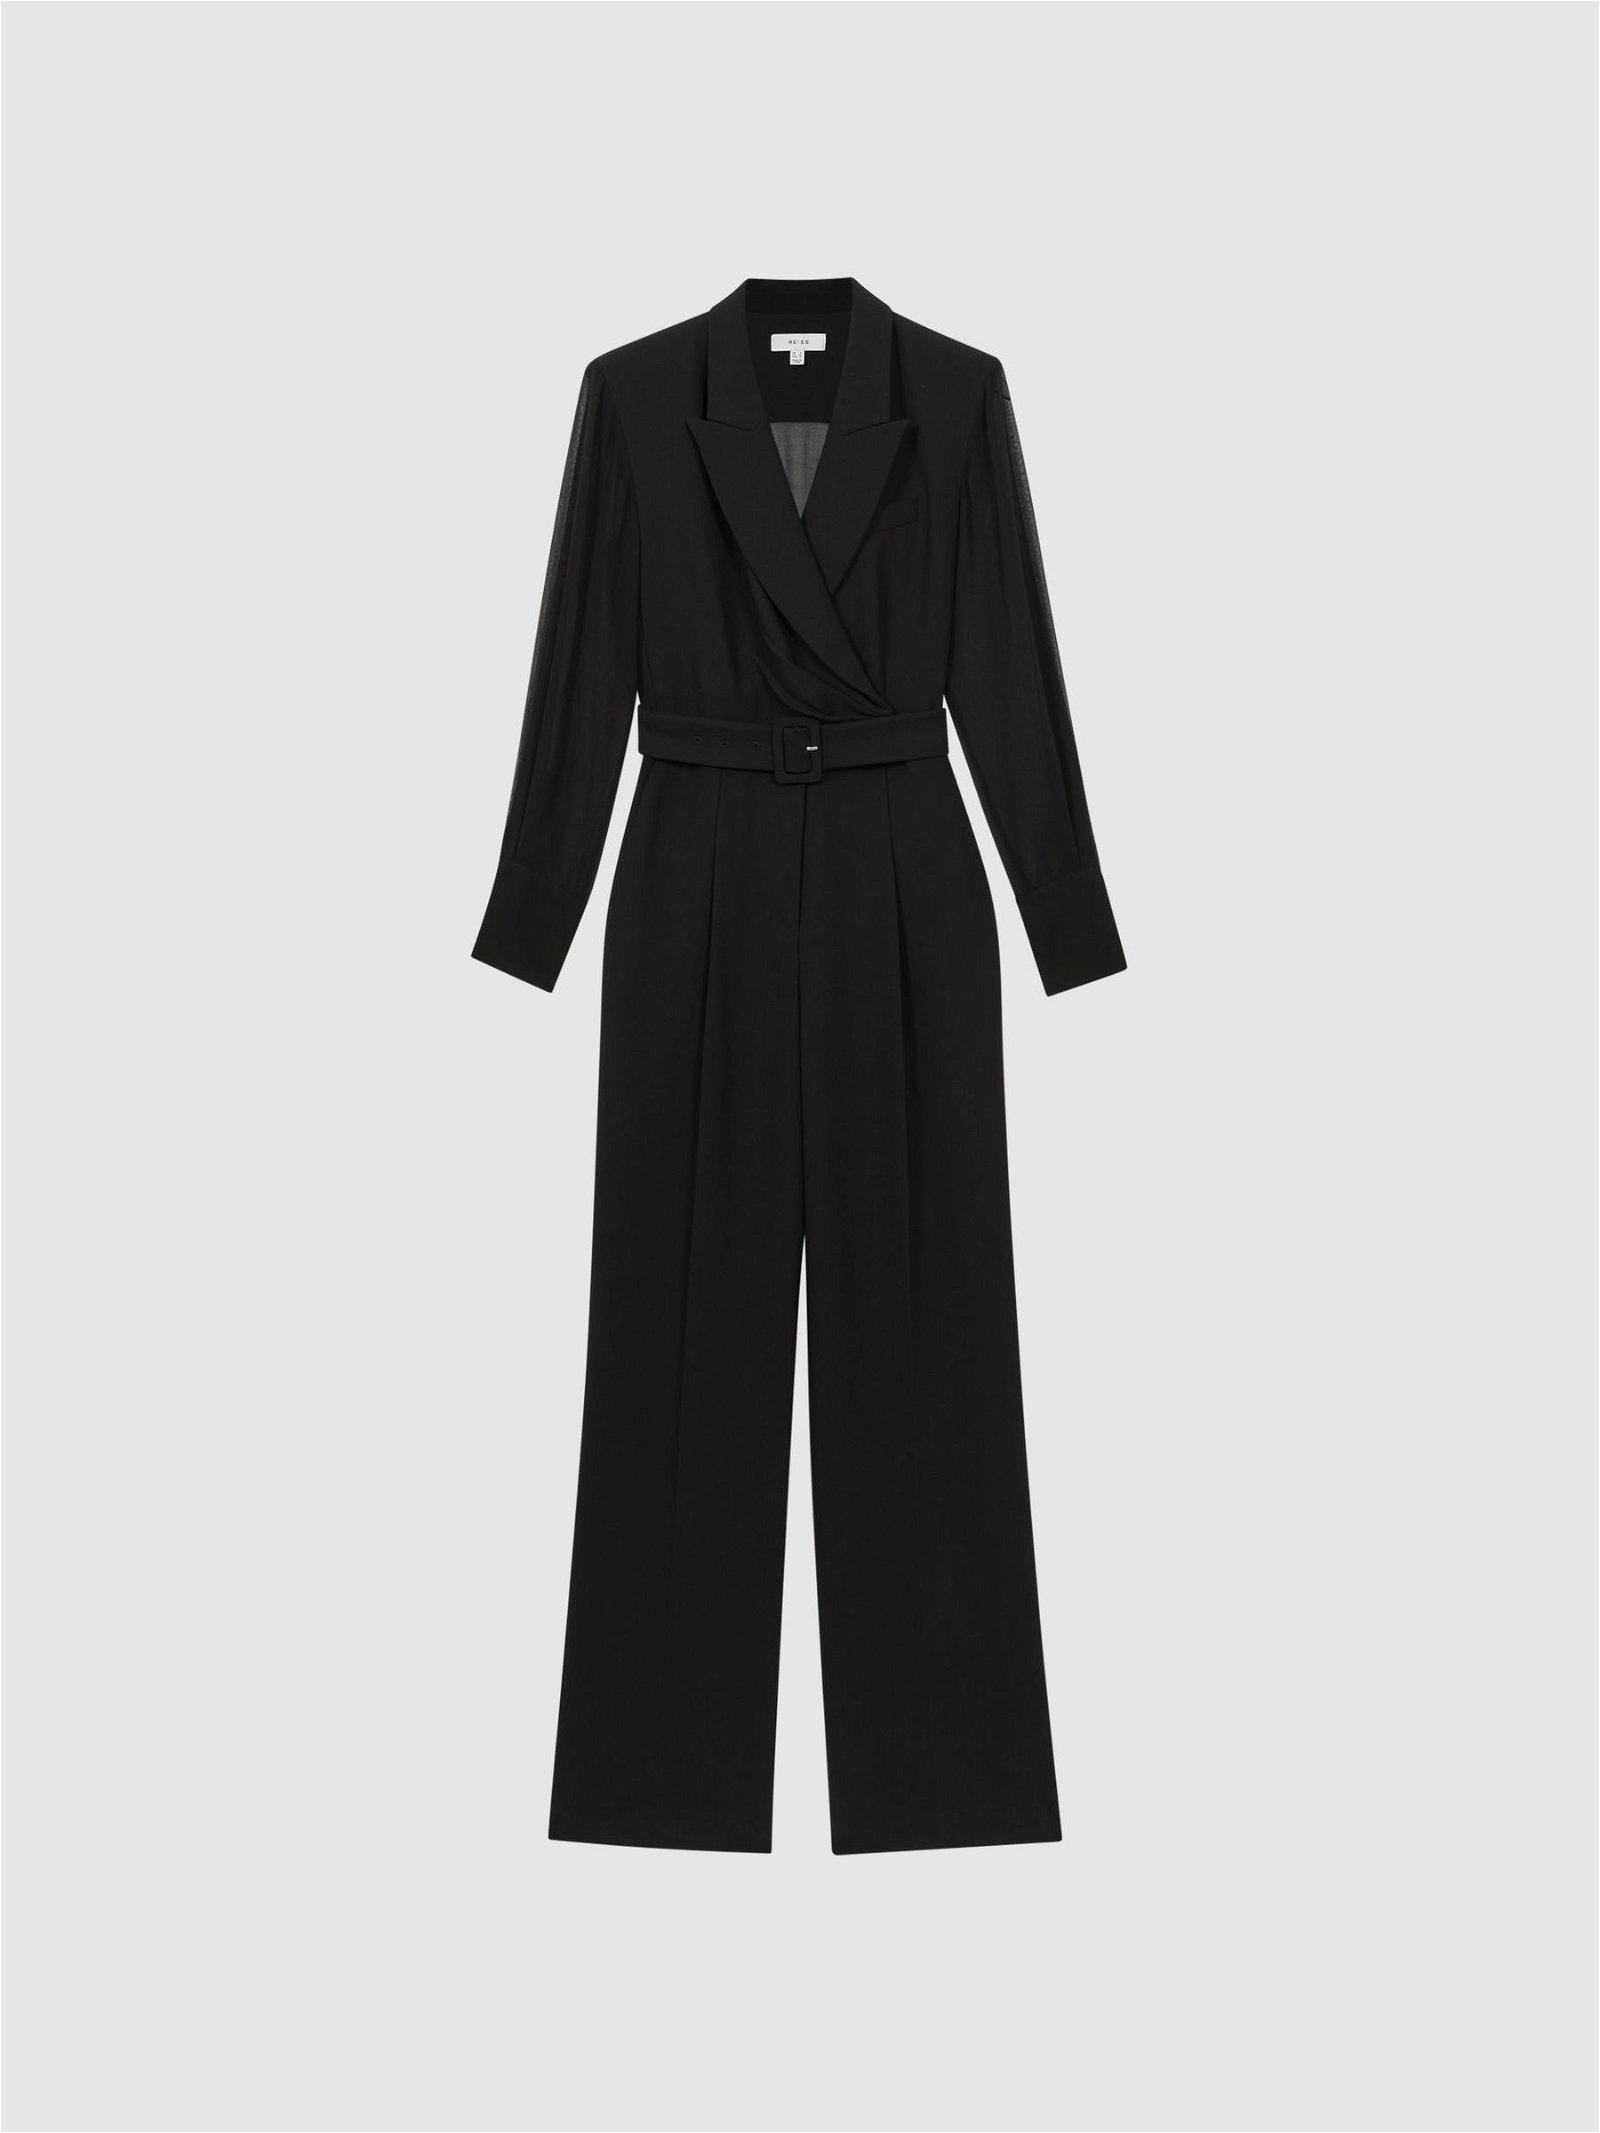 REISS Flora Sheer Belted Double Breasted Jumpsuit in Black | Endource